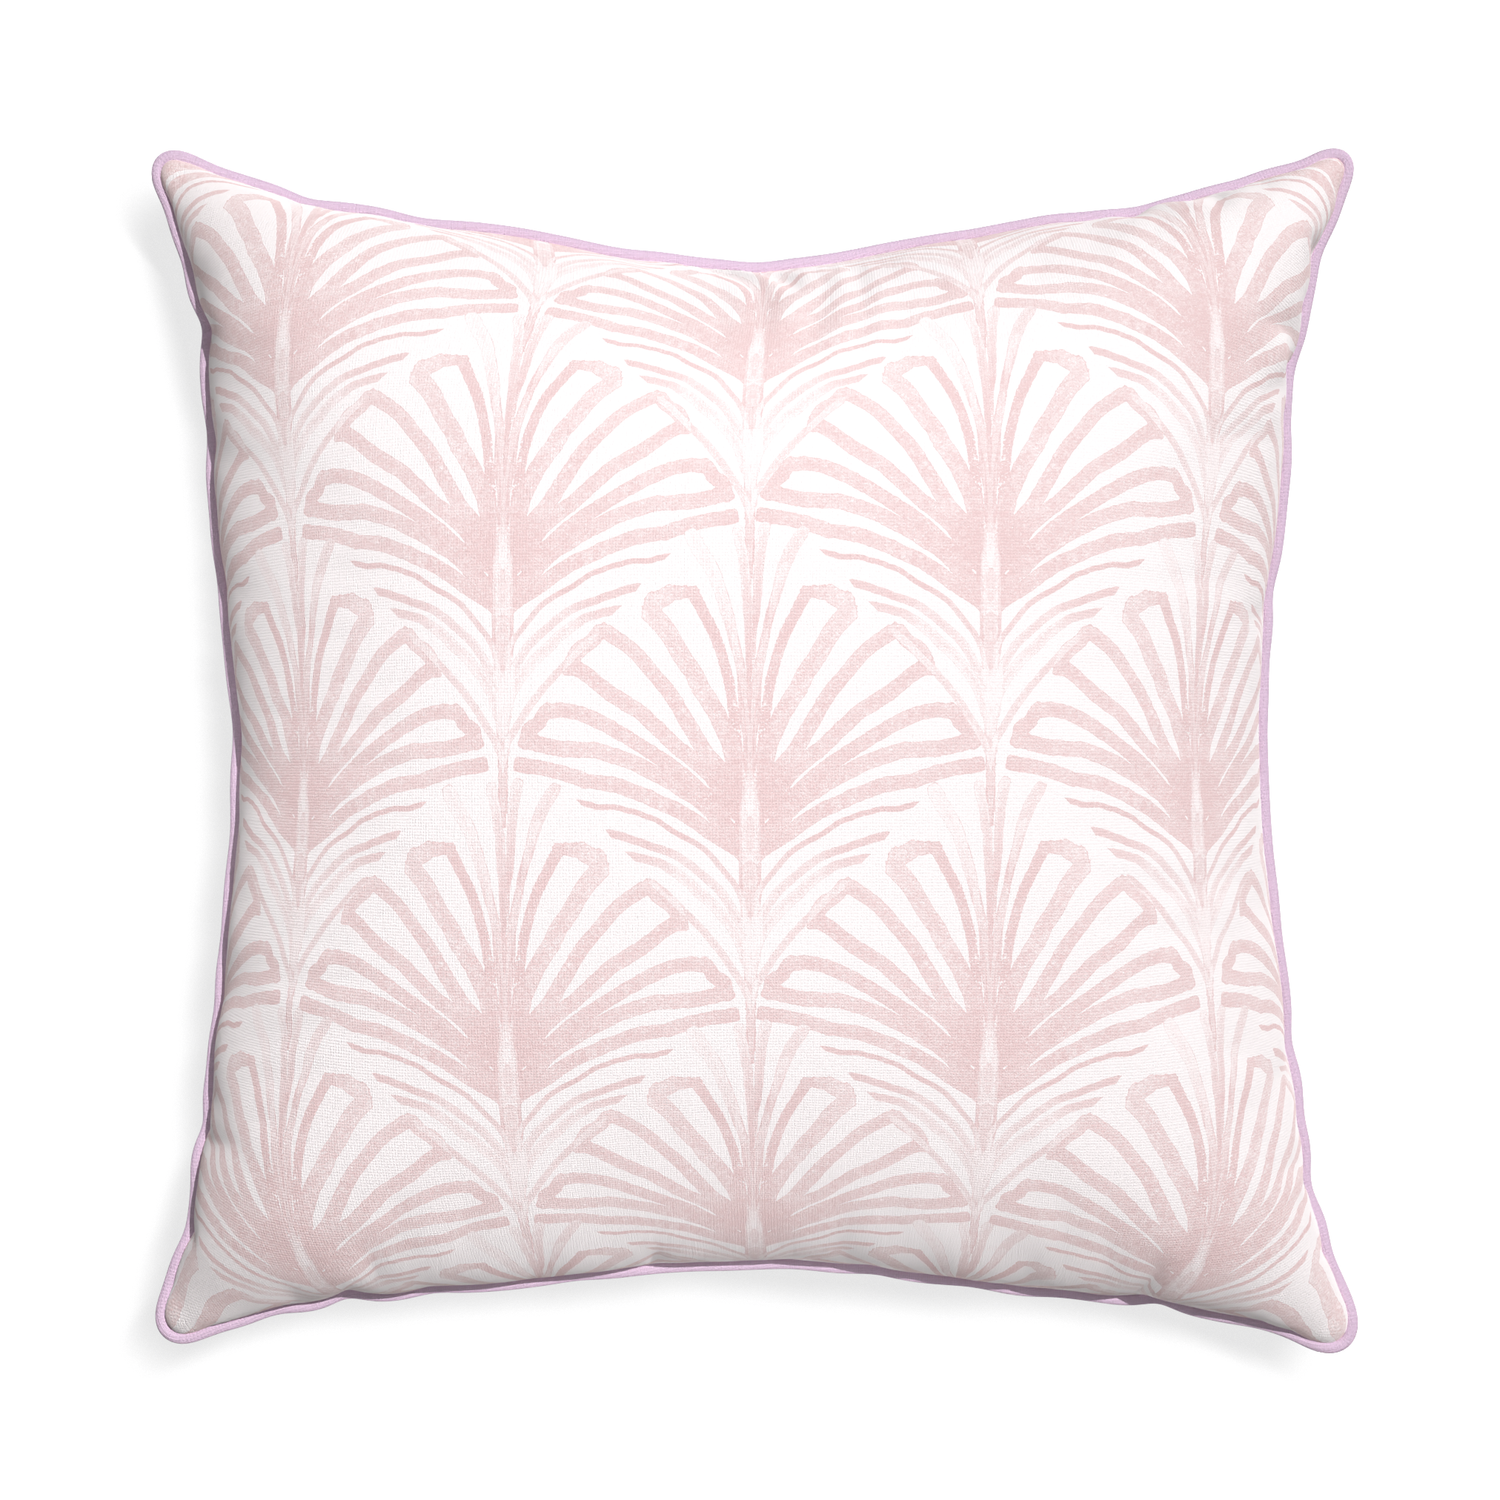 Euro-sham suzy rose custom pillow with l piping on white background